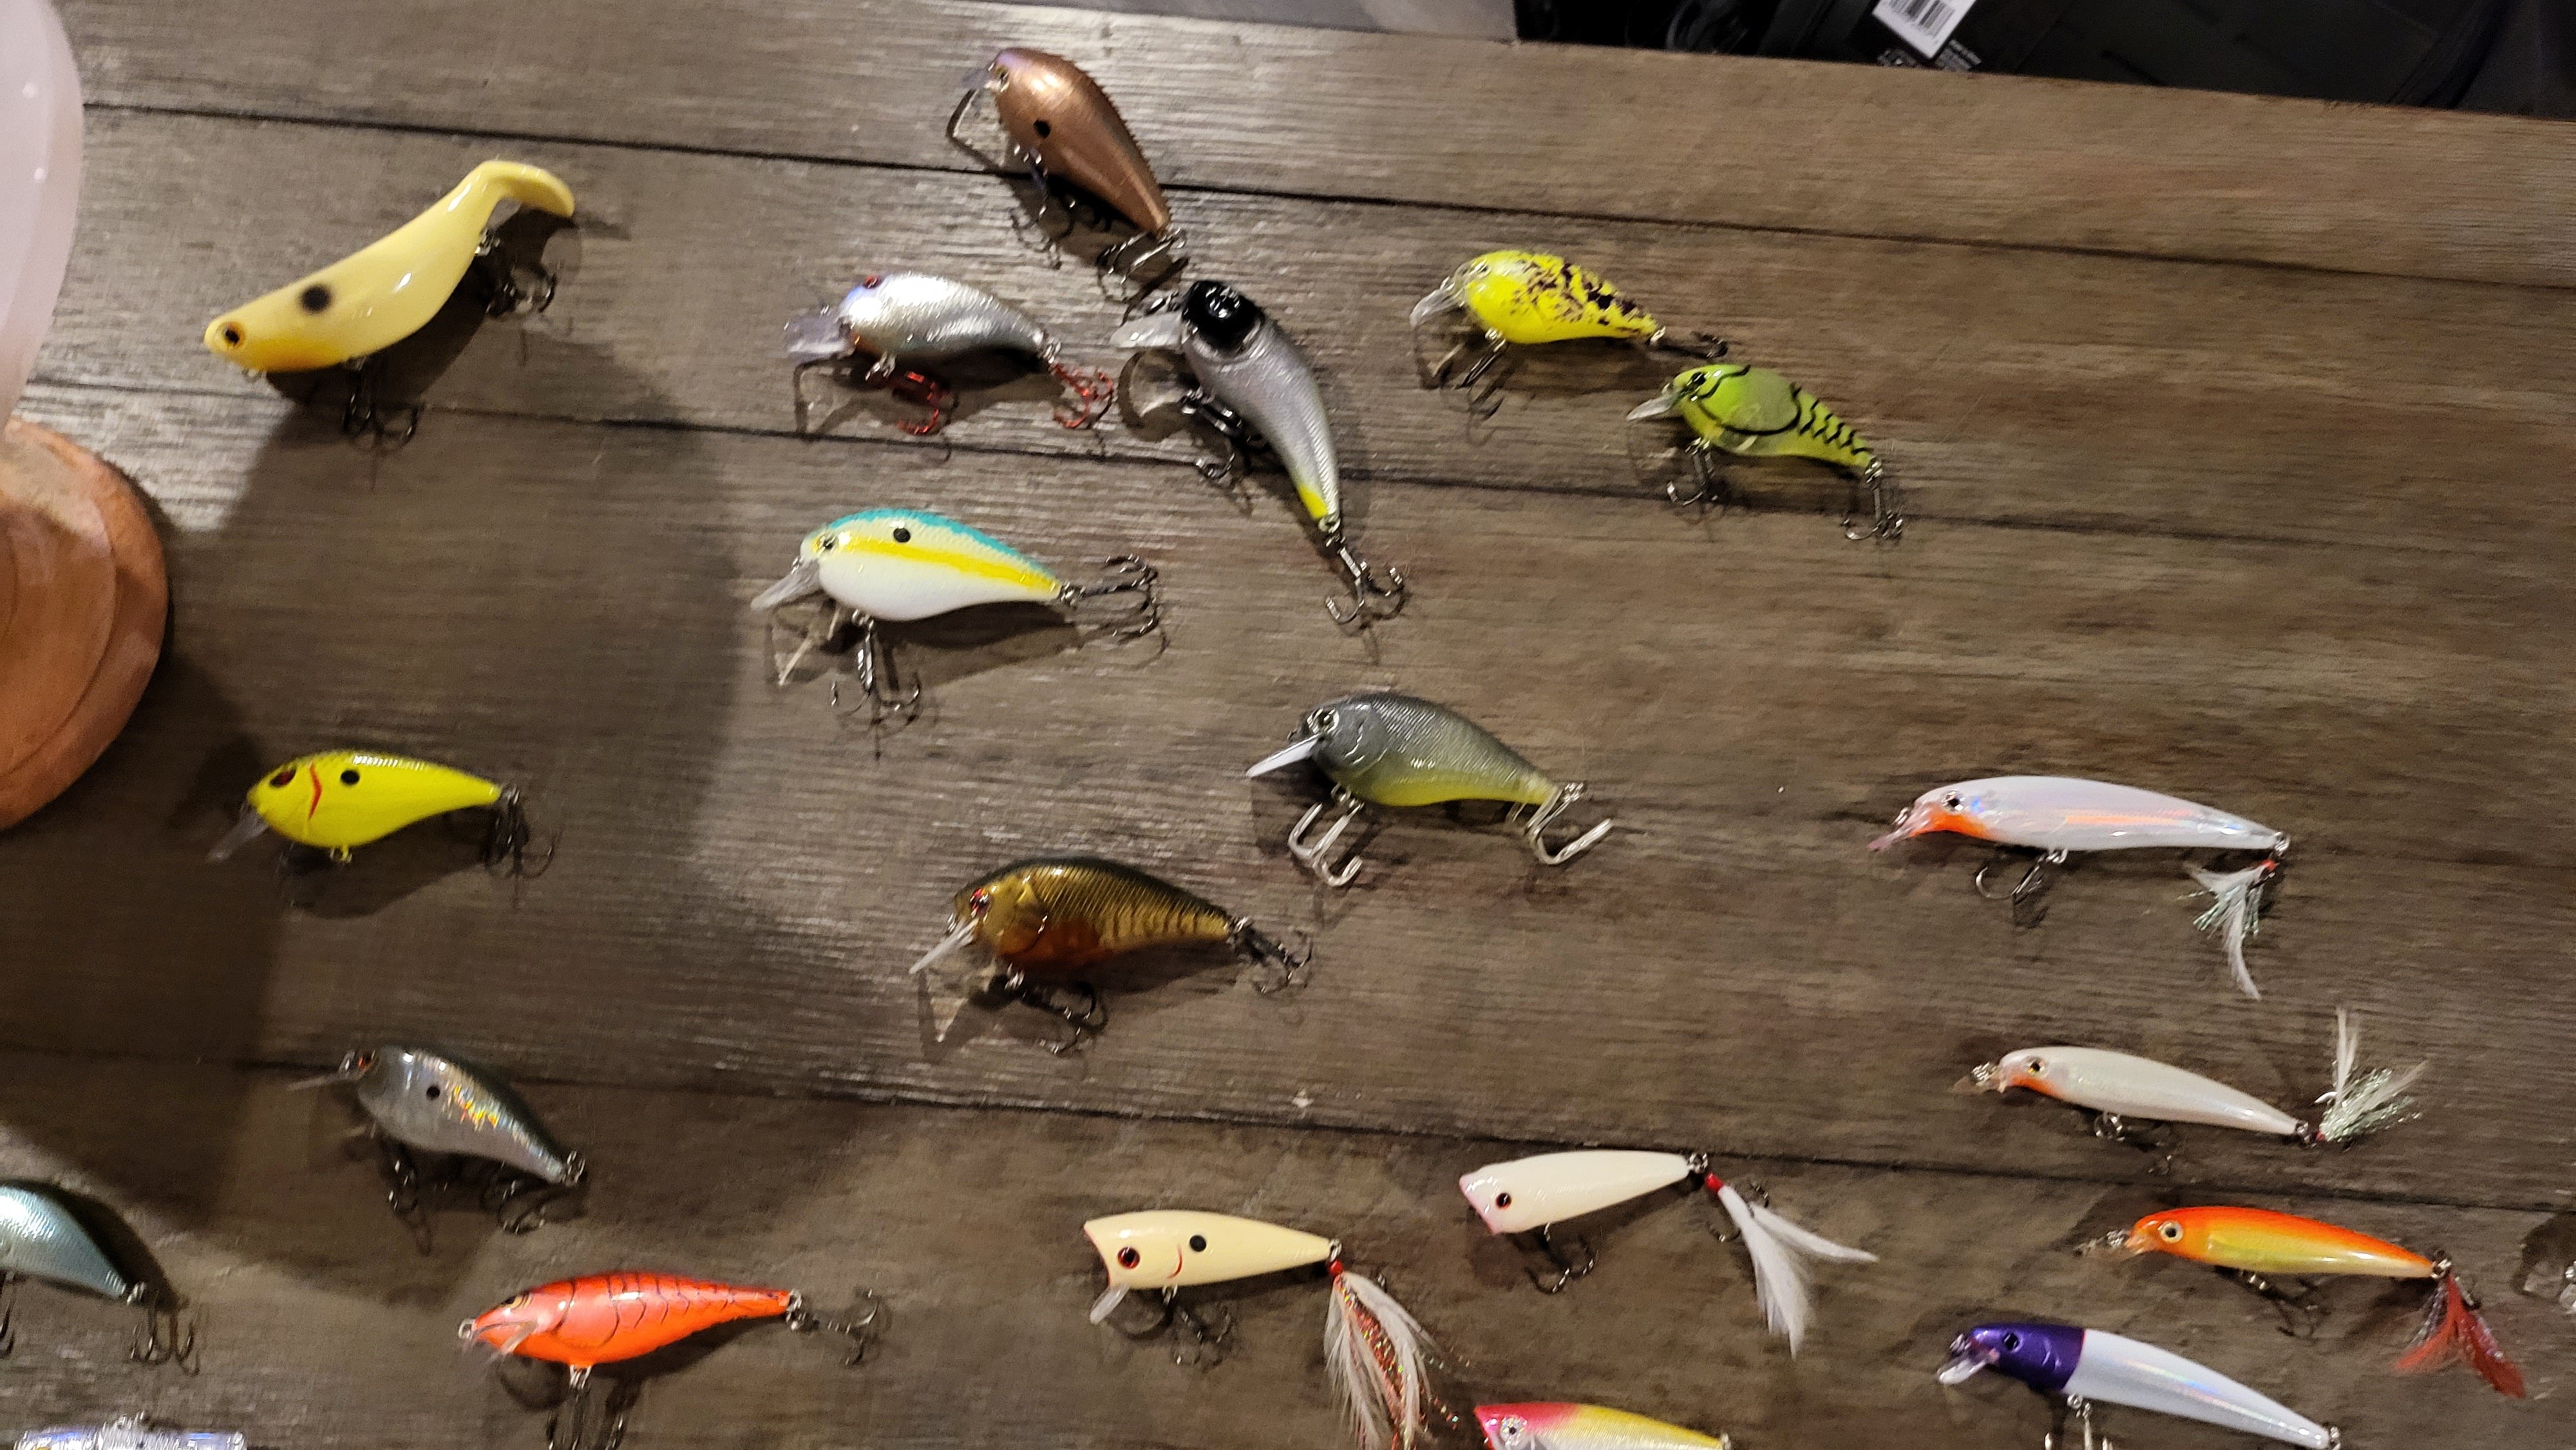 Lucky Craft lipless through the years - Fishing Tackle - Bass Fishing Forums